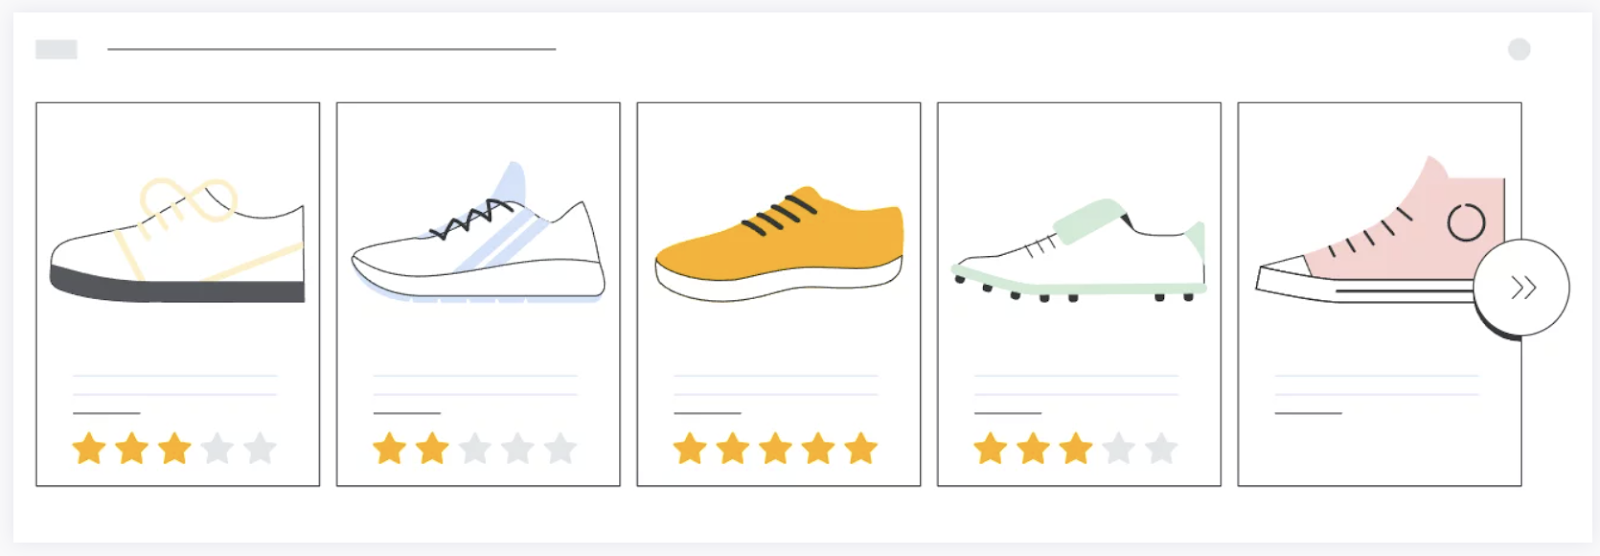 Adding product ratings and reviews- Google Shopping ranking factor